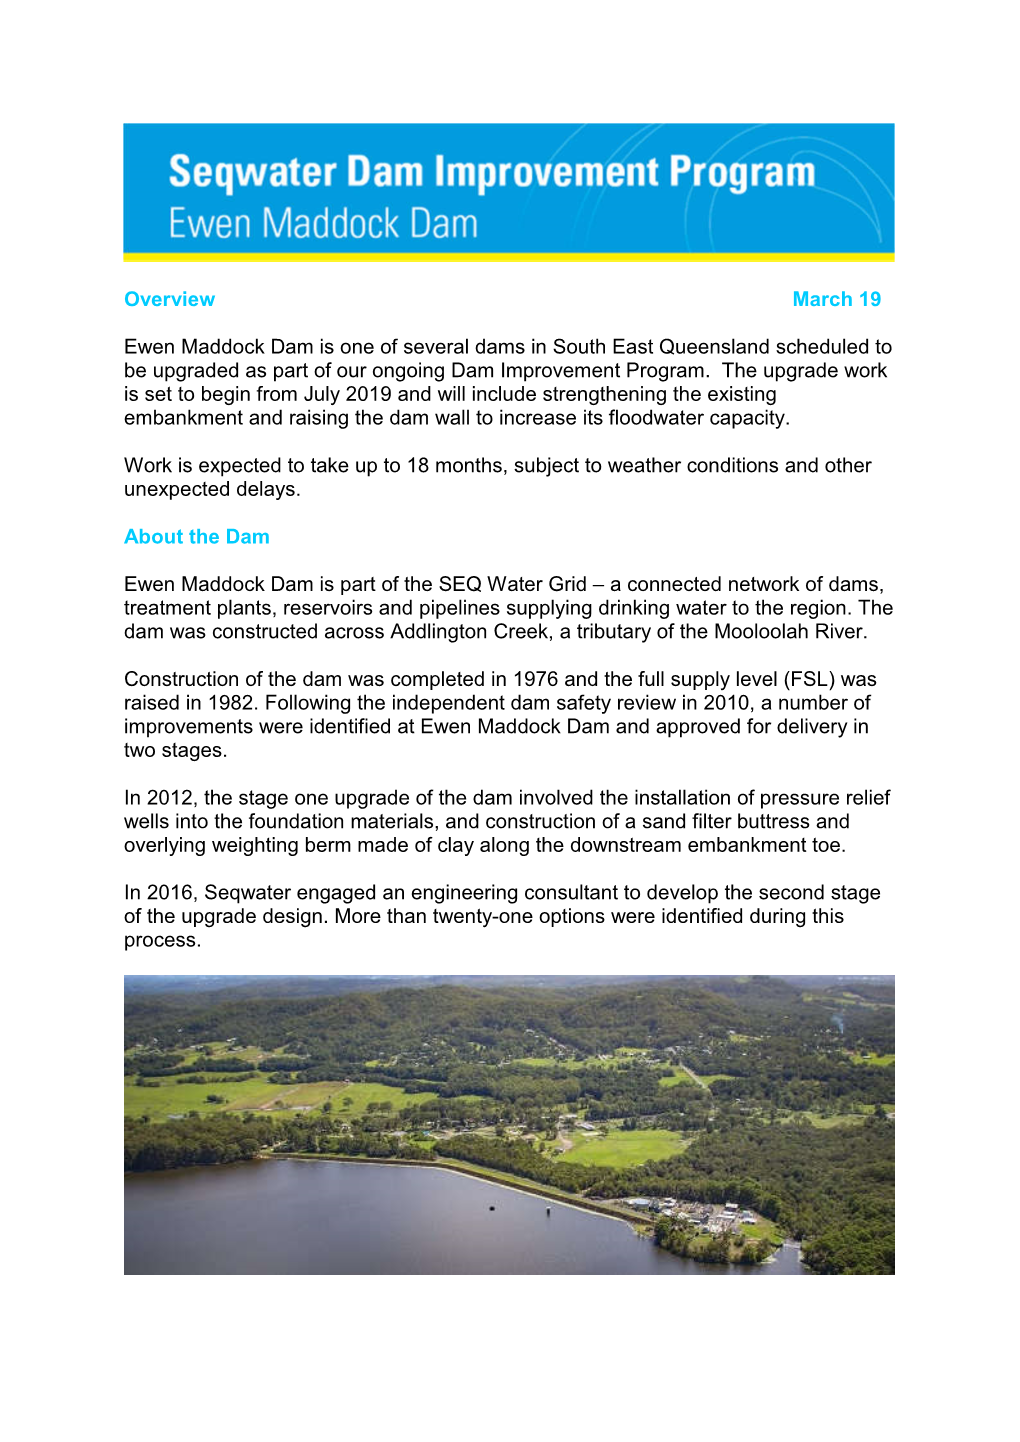 Overview March 19 Ewen Maddock Dam Is One of Several Dams in South East Queensland Scheduled to Be Upgraded As Part of Our O